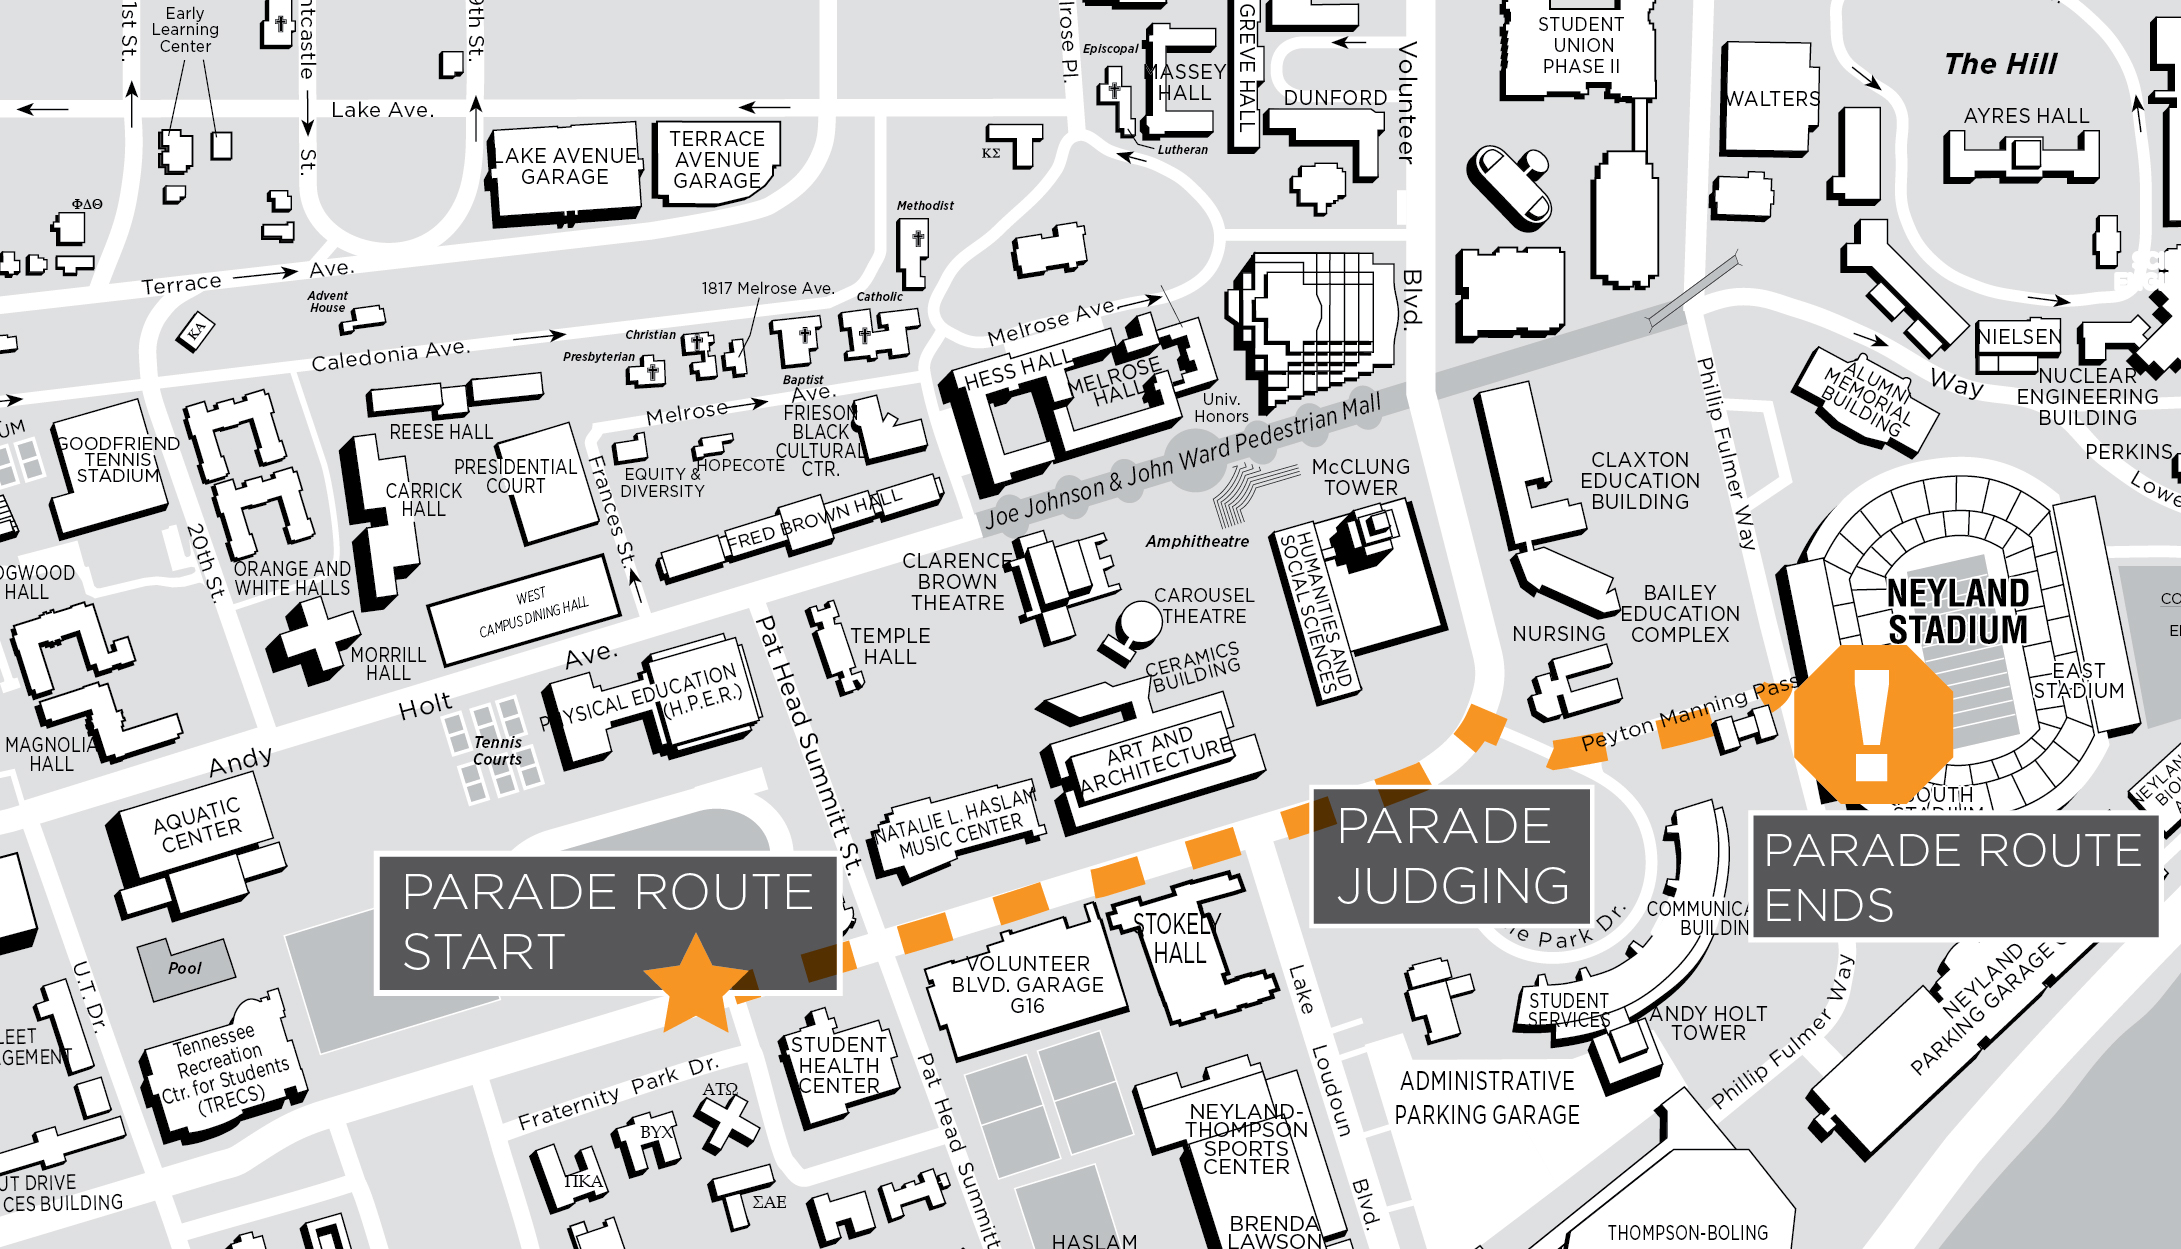 The 2023 Homecoming parade route is highlighted on the campus map, starting on Volunteer Blvd. in front of Fraternity Park, heading east past Circle Park, and turning down Peyton Manning Pass to end in front of Neyland Stadium.